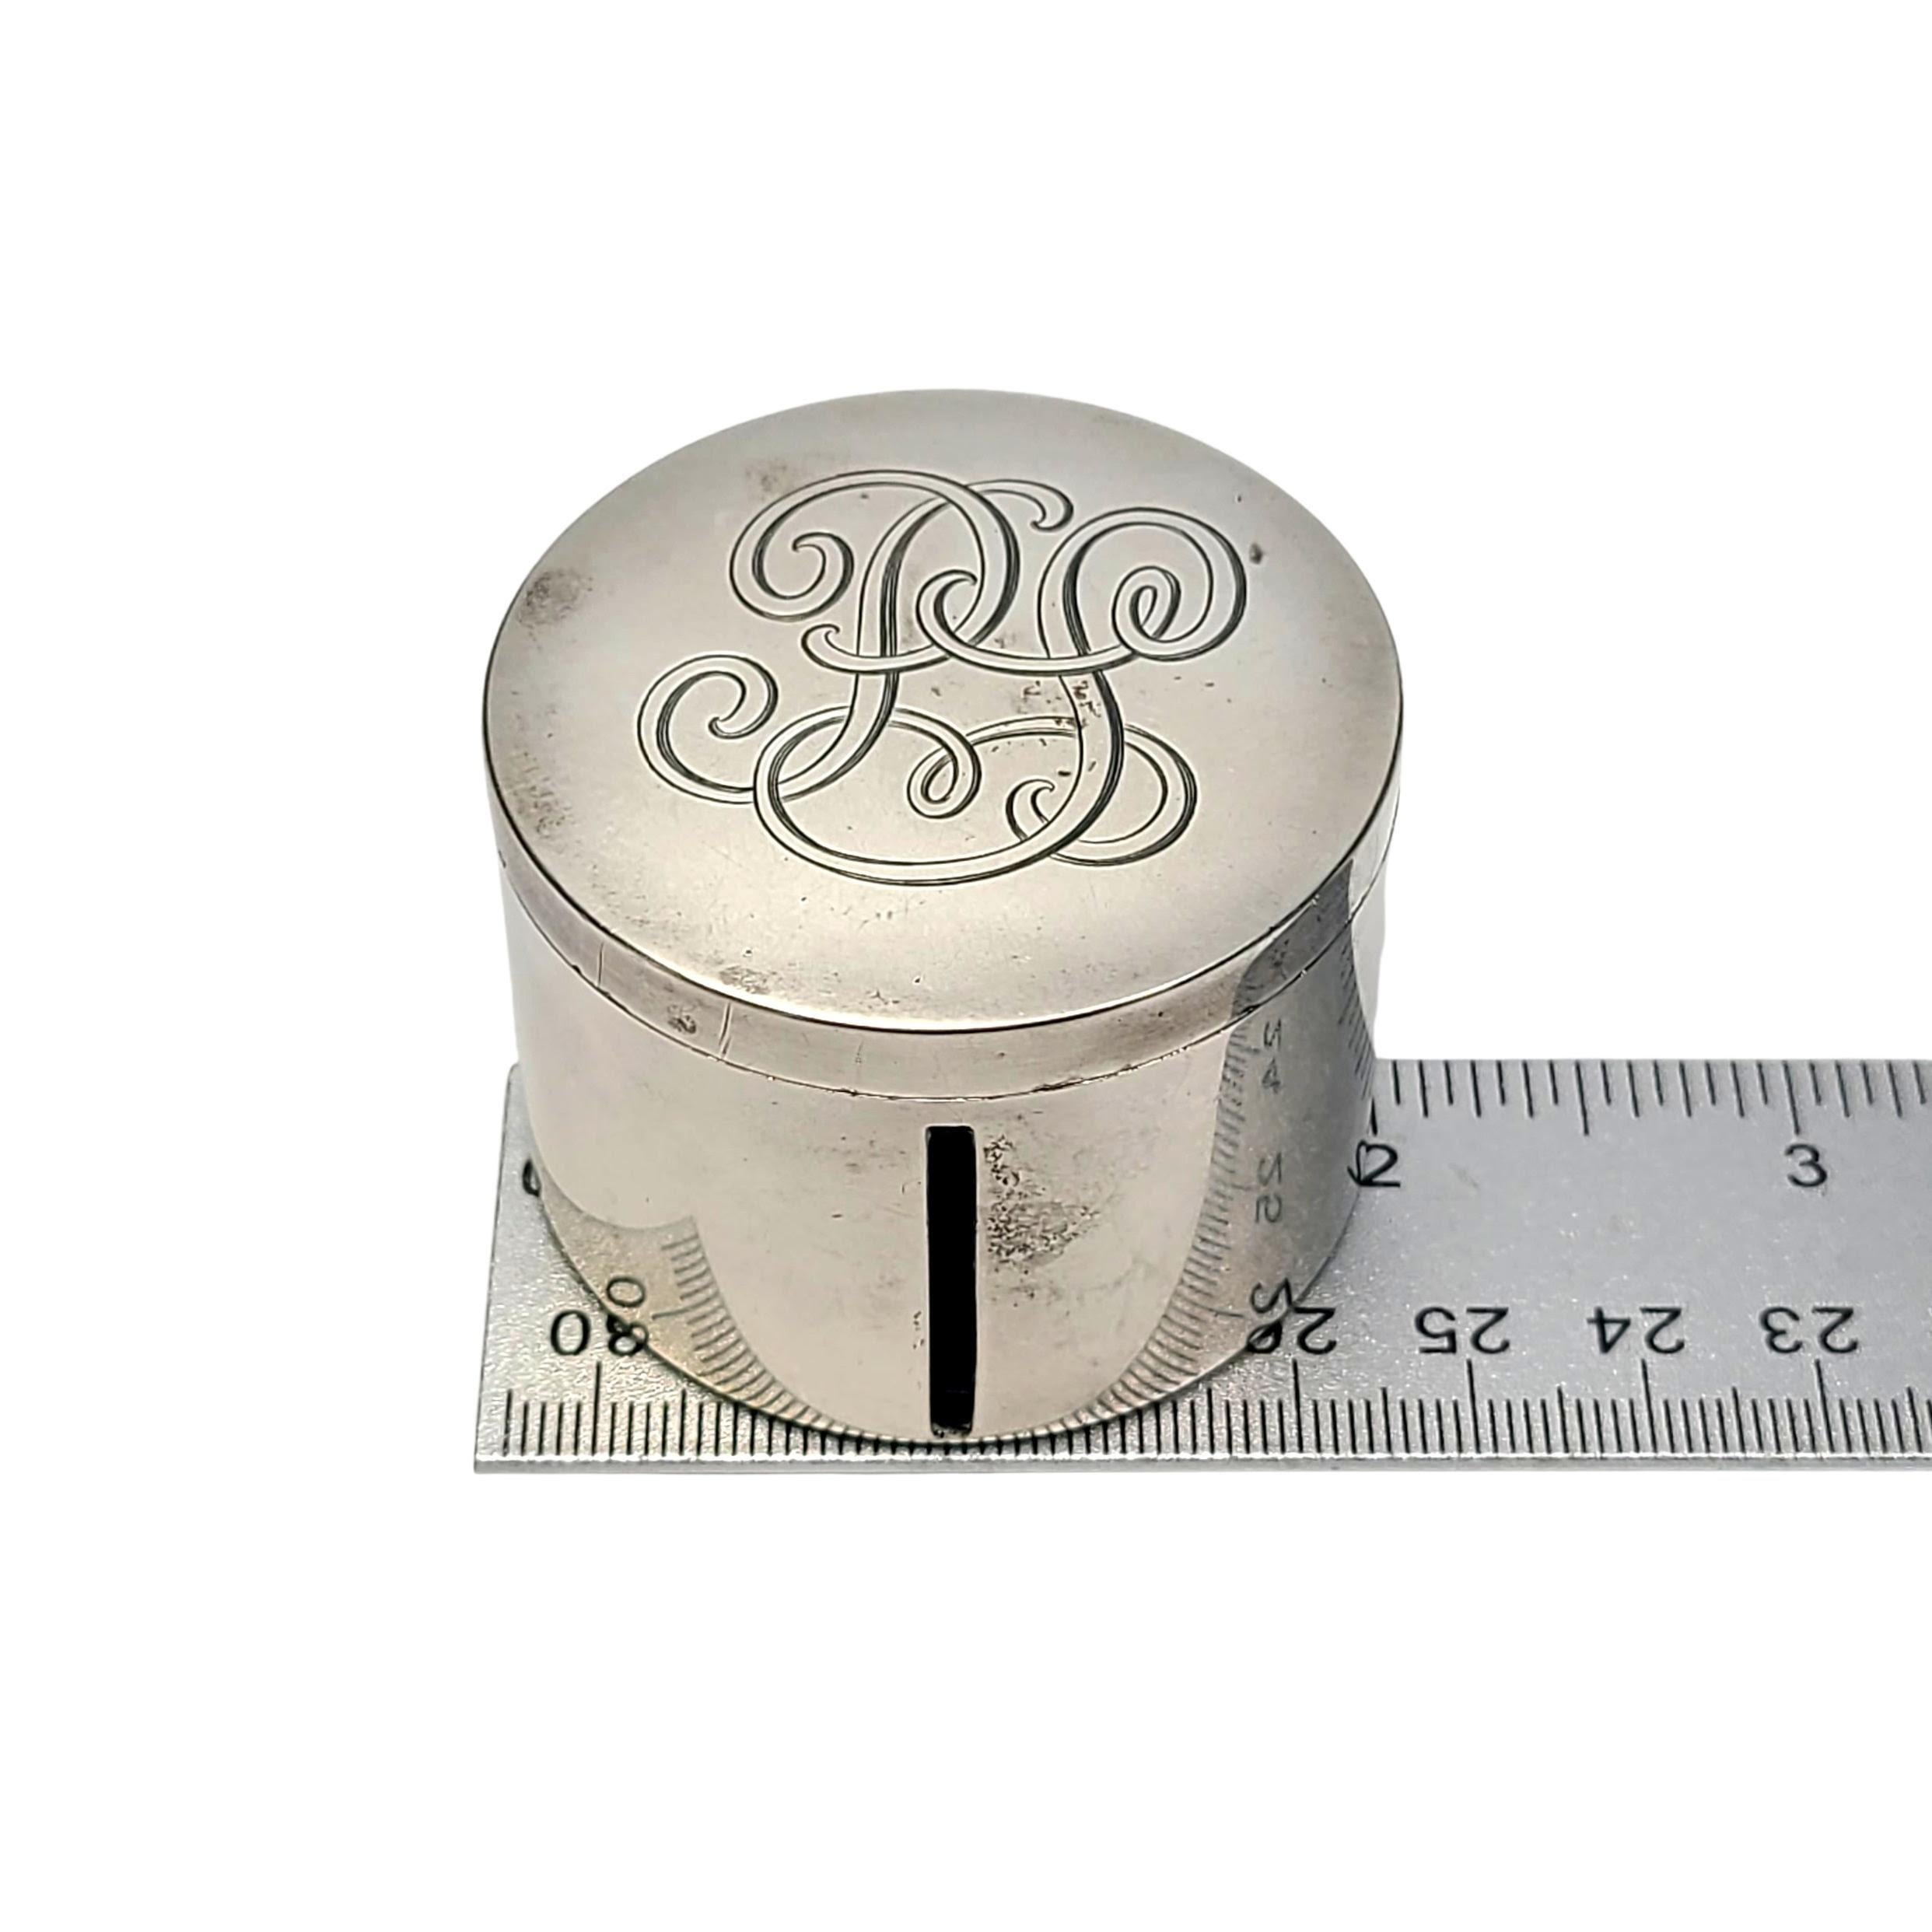 Currier and Roby Sterling Silver Round Stamp Dispenser Box with Monogram For Sale 4